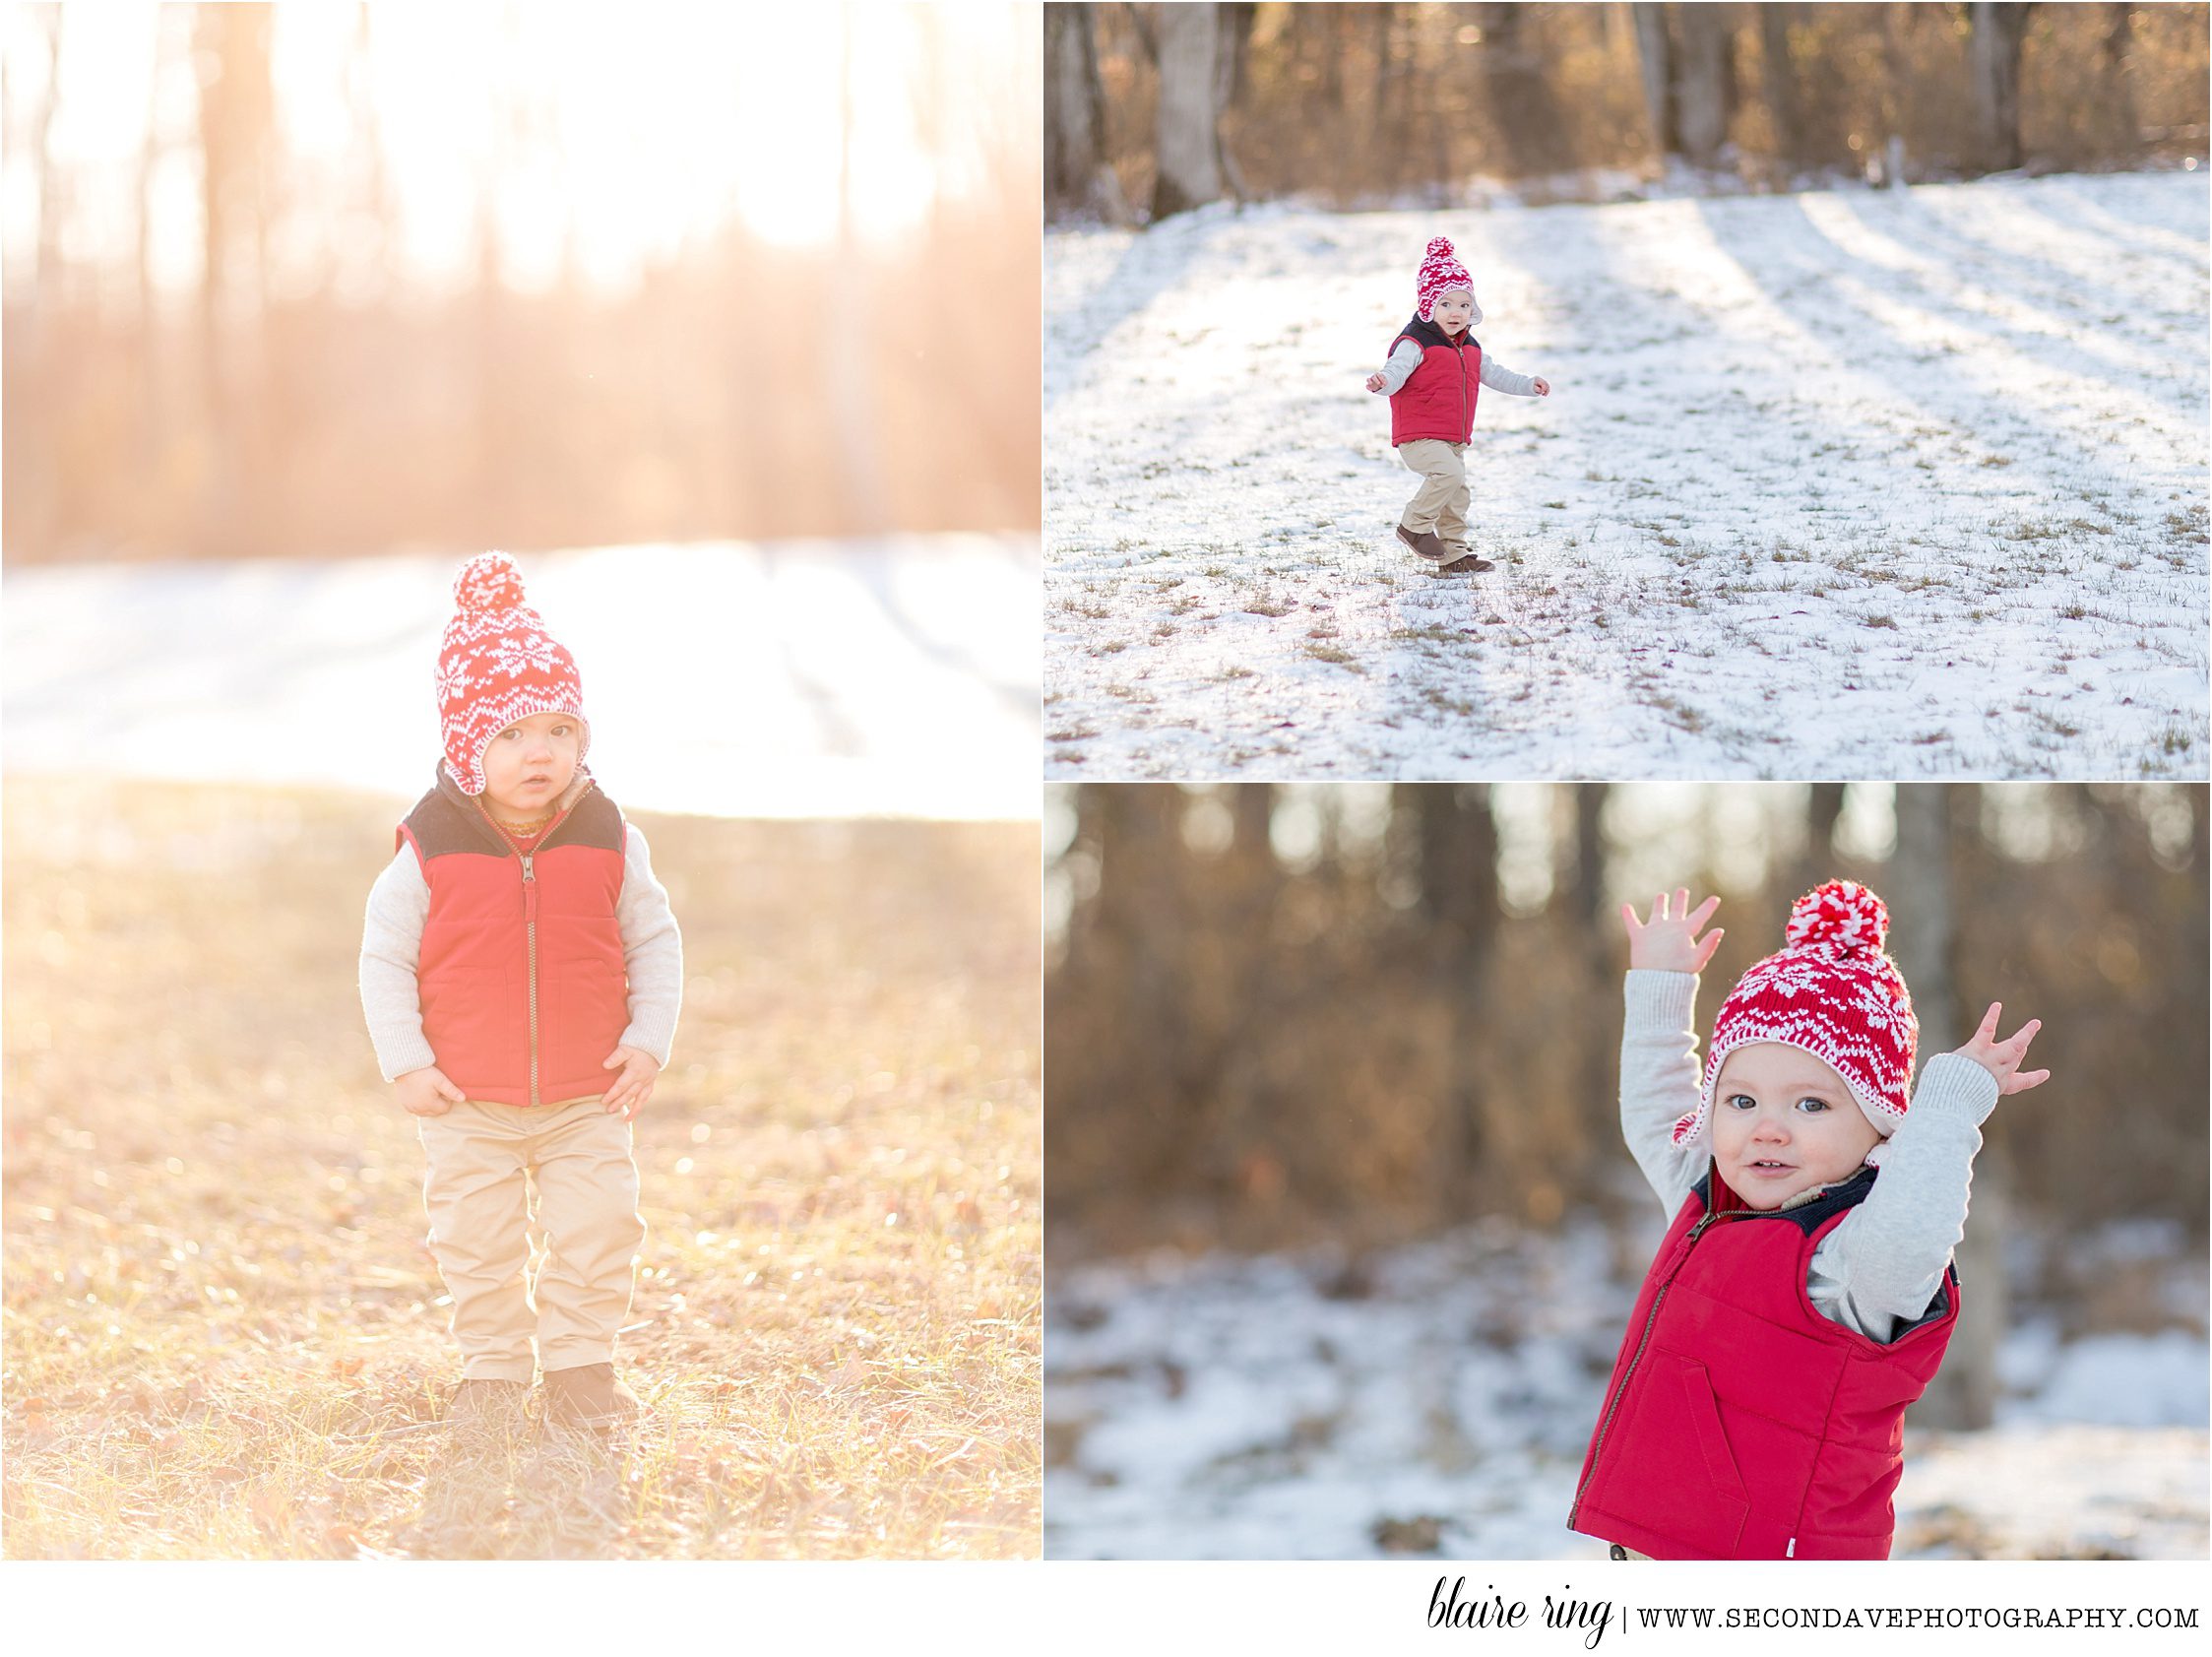 Meet the family that won a free session with a family photographer in Washington DC area!